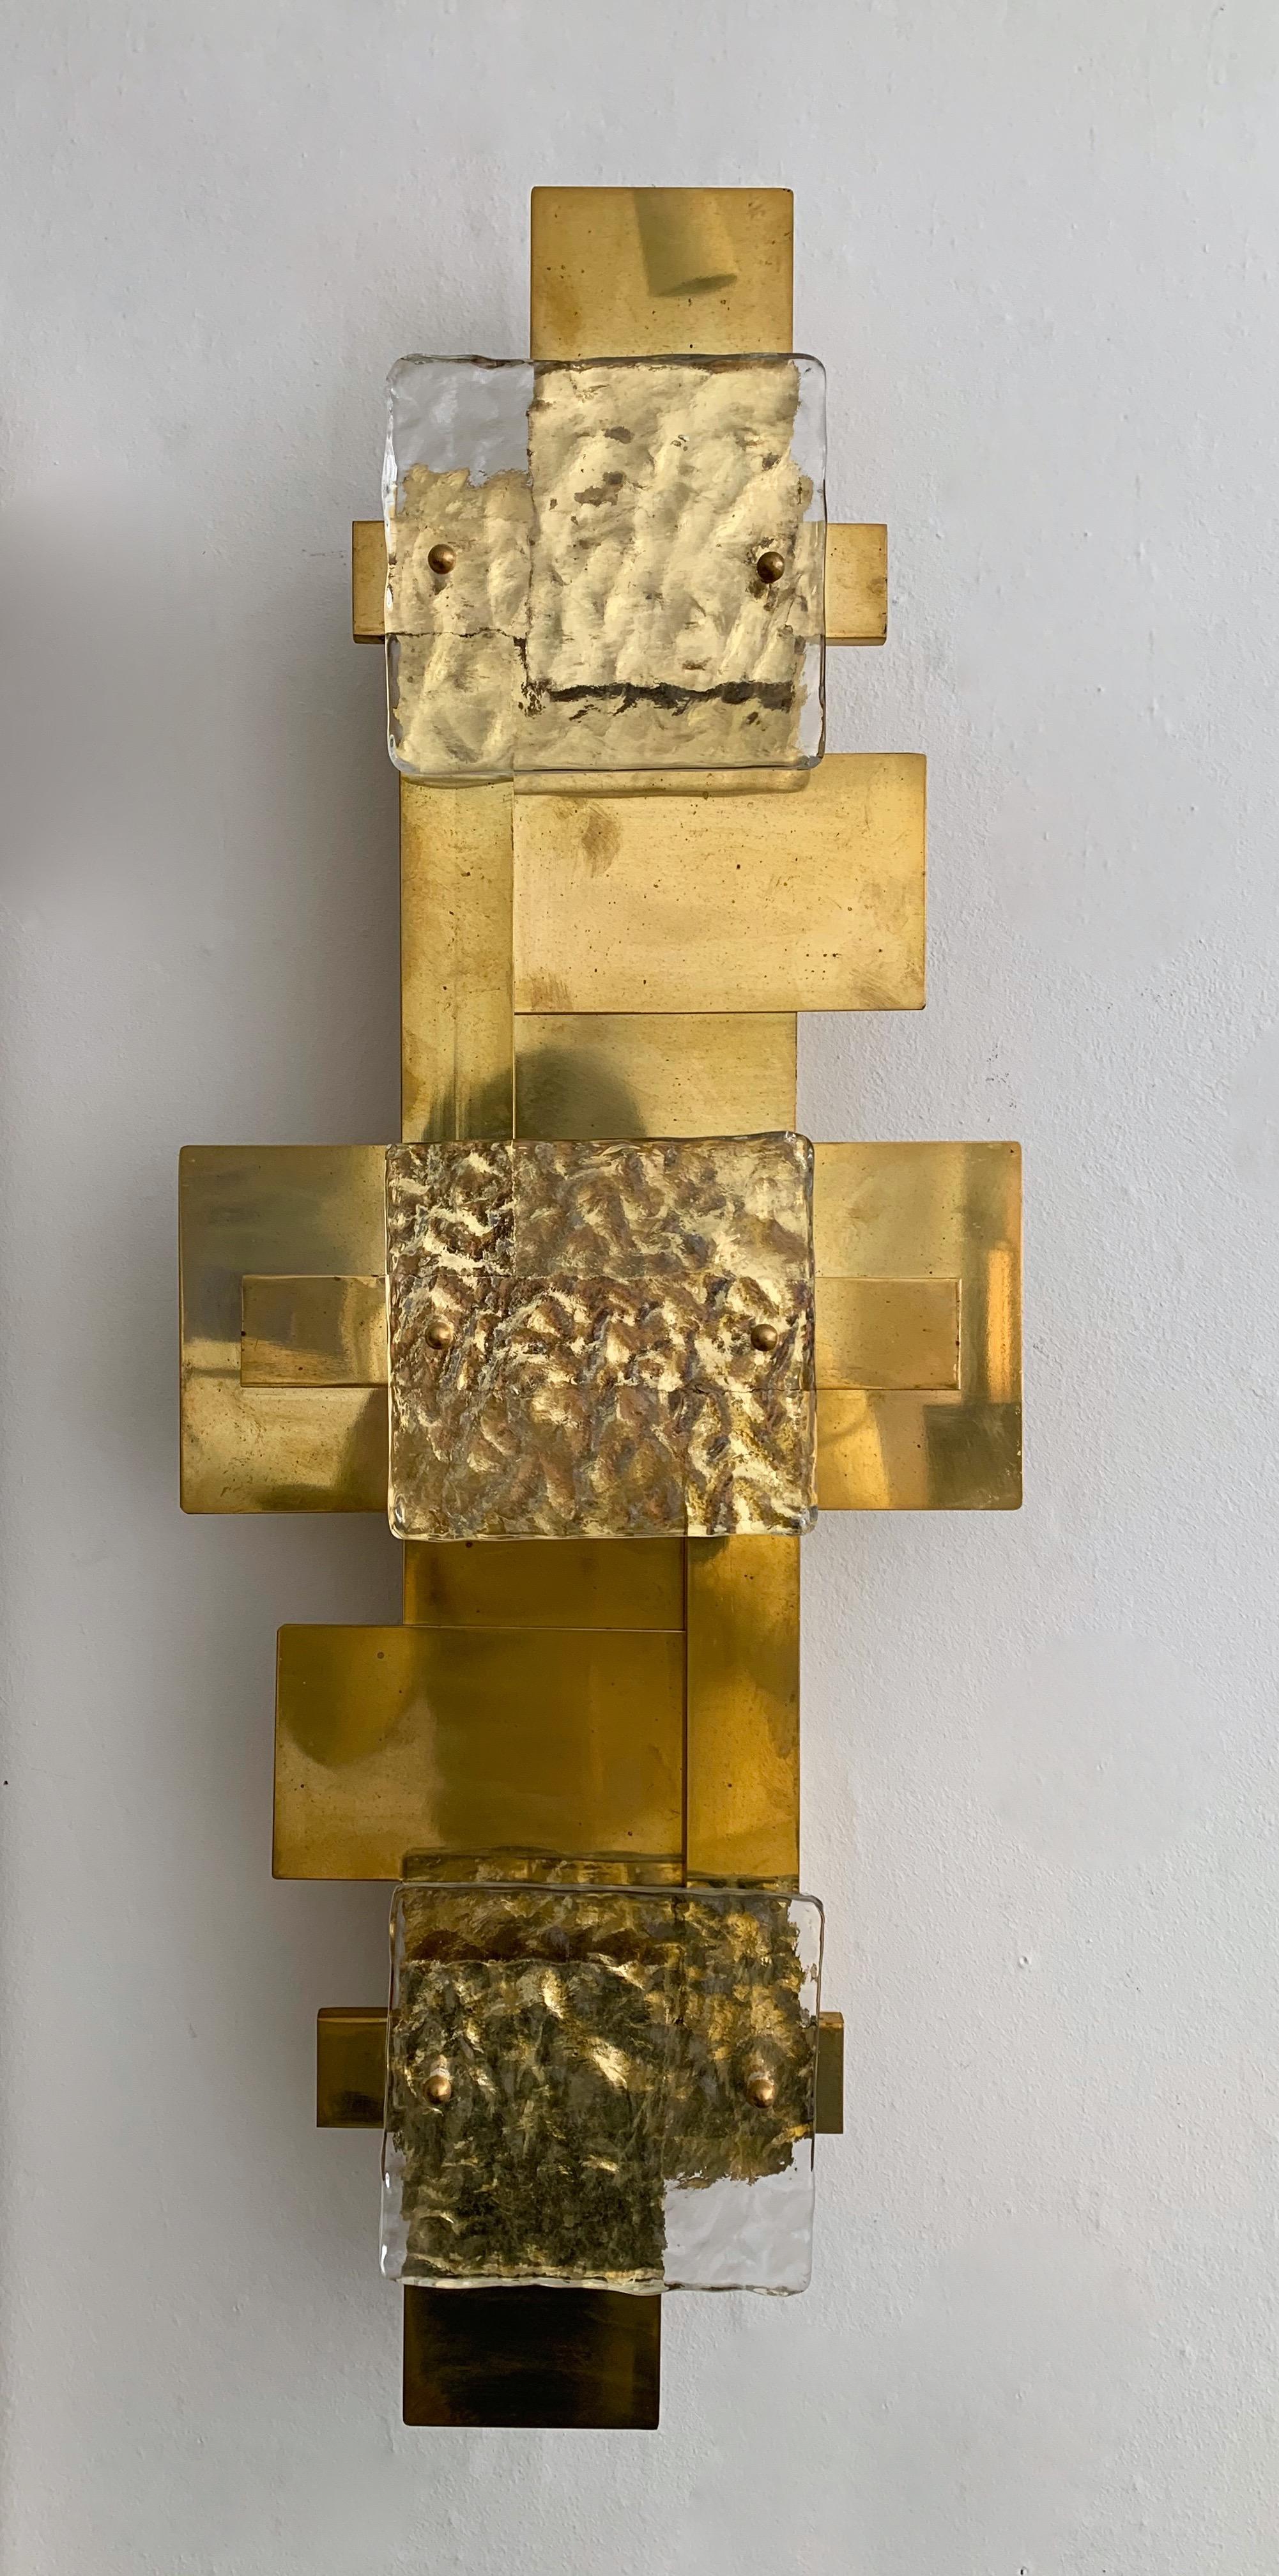 Pair of sconces wall lamps lights panels. Contemporary work, small Italian workshop, few exclusive productions. Full brass and murano glass. In the style of Reggiani, Sciolari, Palwa, Kinkeldey, Hollywood Regency, Mazzega, Venini, Vistosi, VeArt,